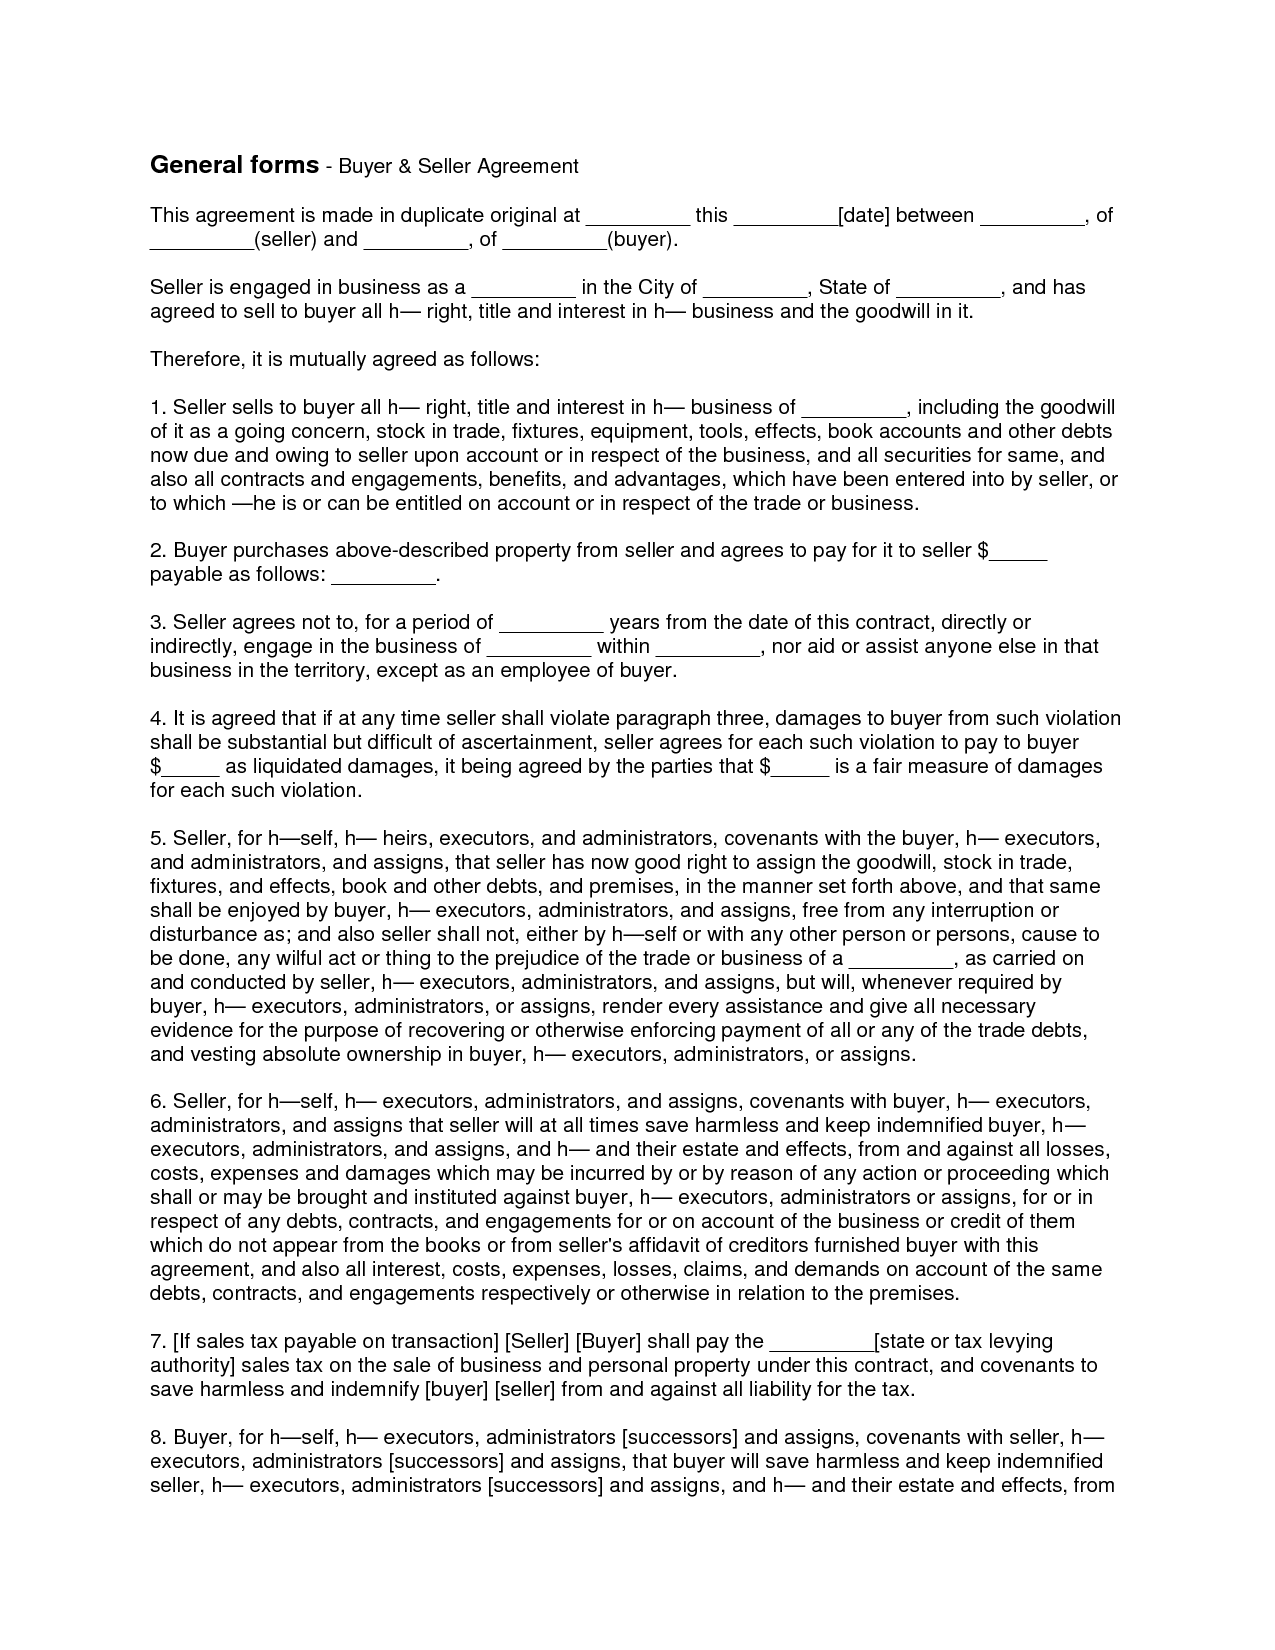 buyers-agreement-form-free-printable-documents